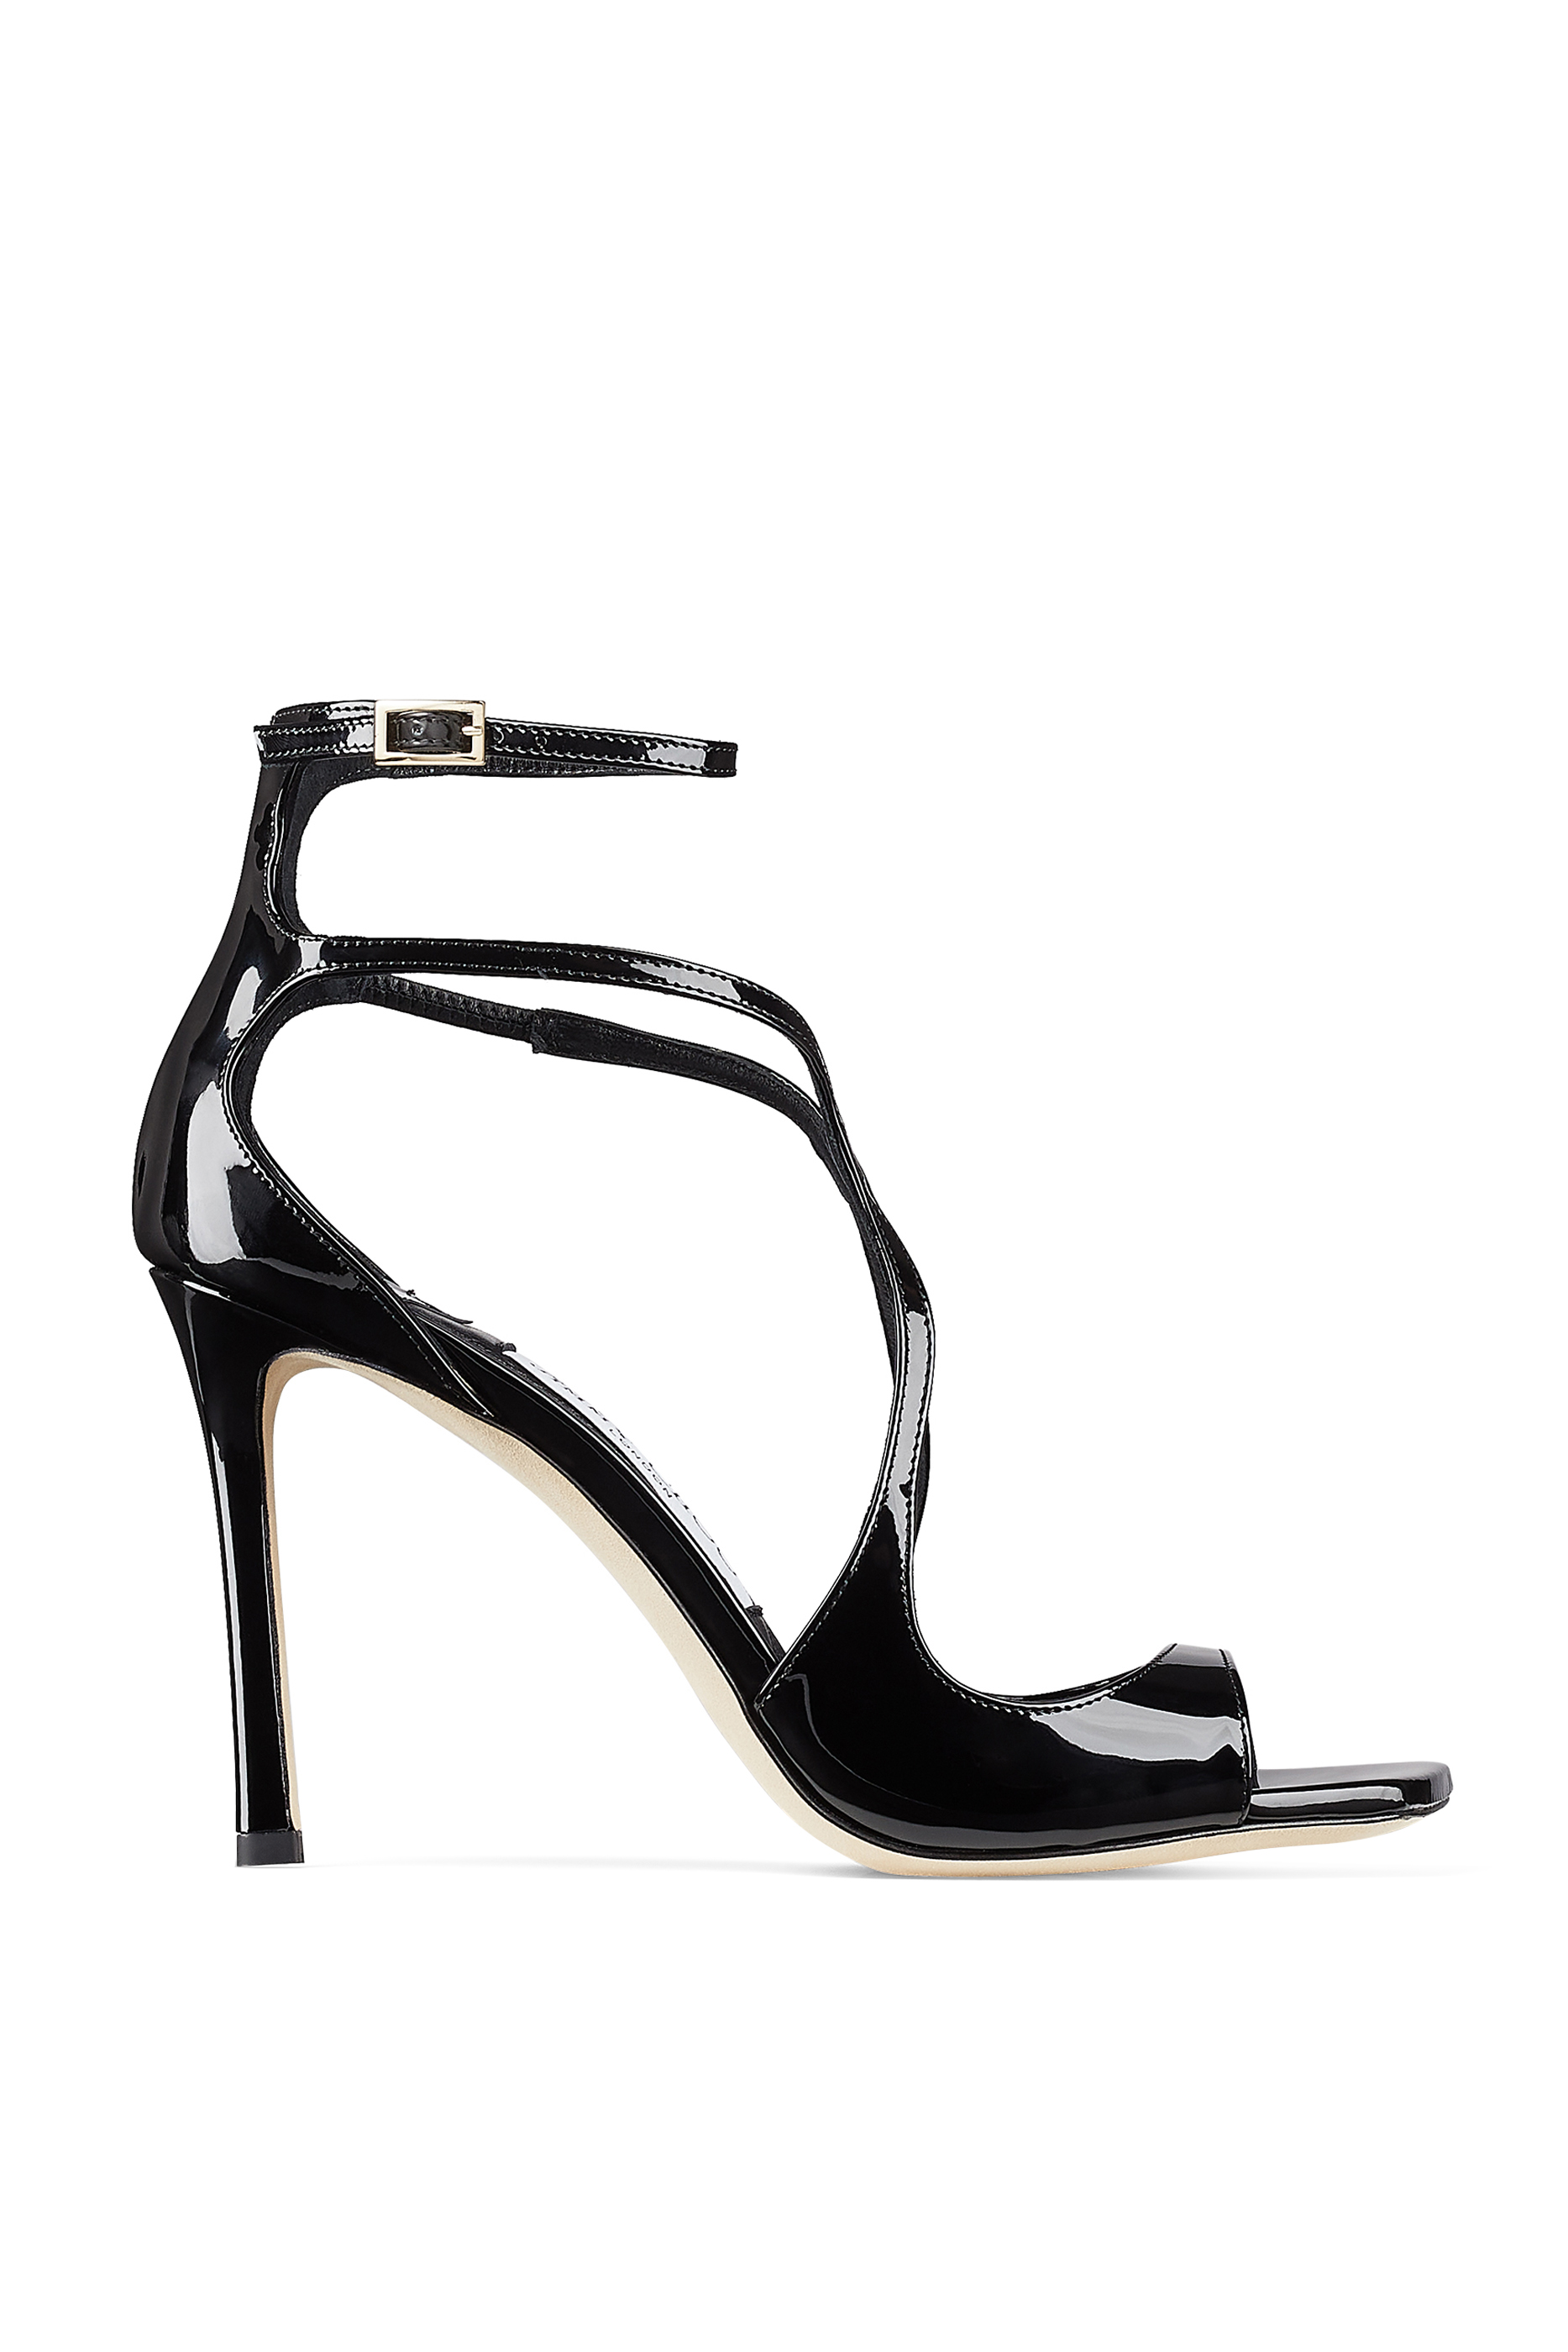 Buy Jimmy Choo Azia 95 Patent Leather Sandals for | Bloomingdale's KSA